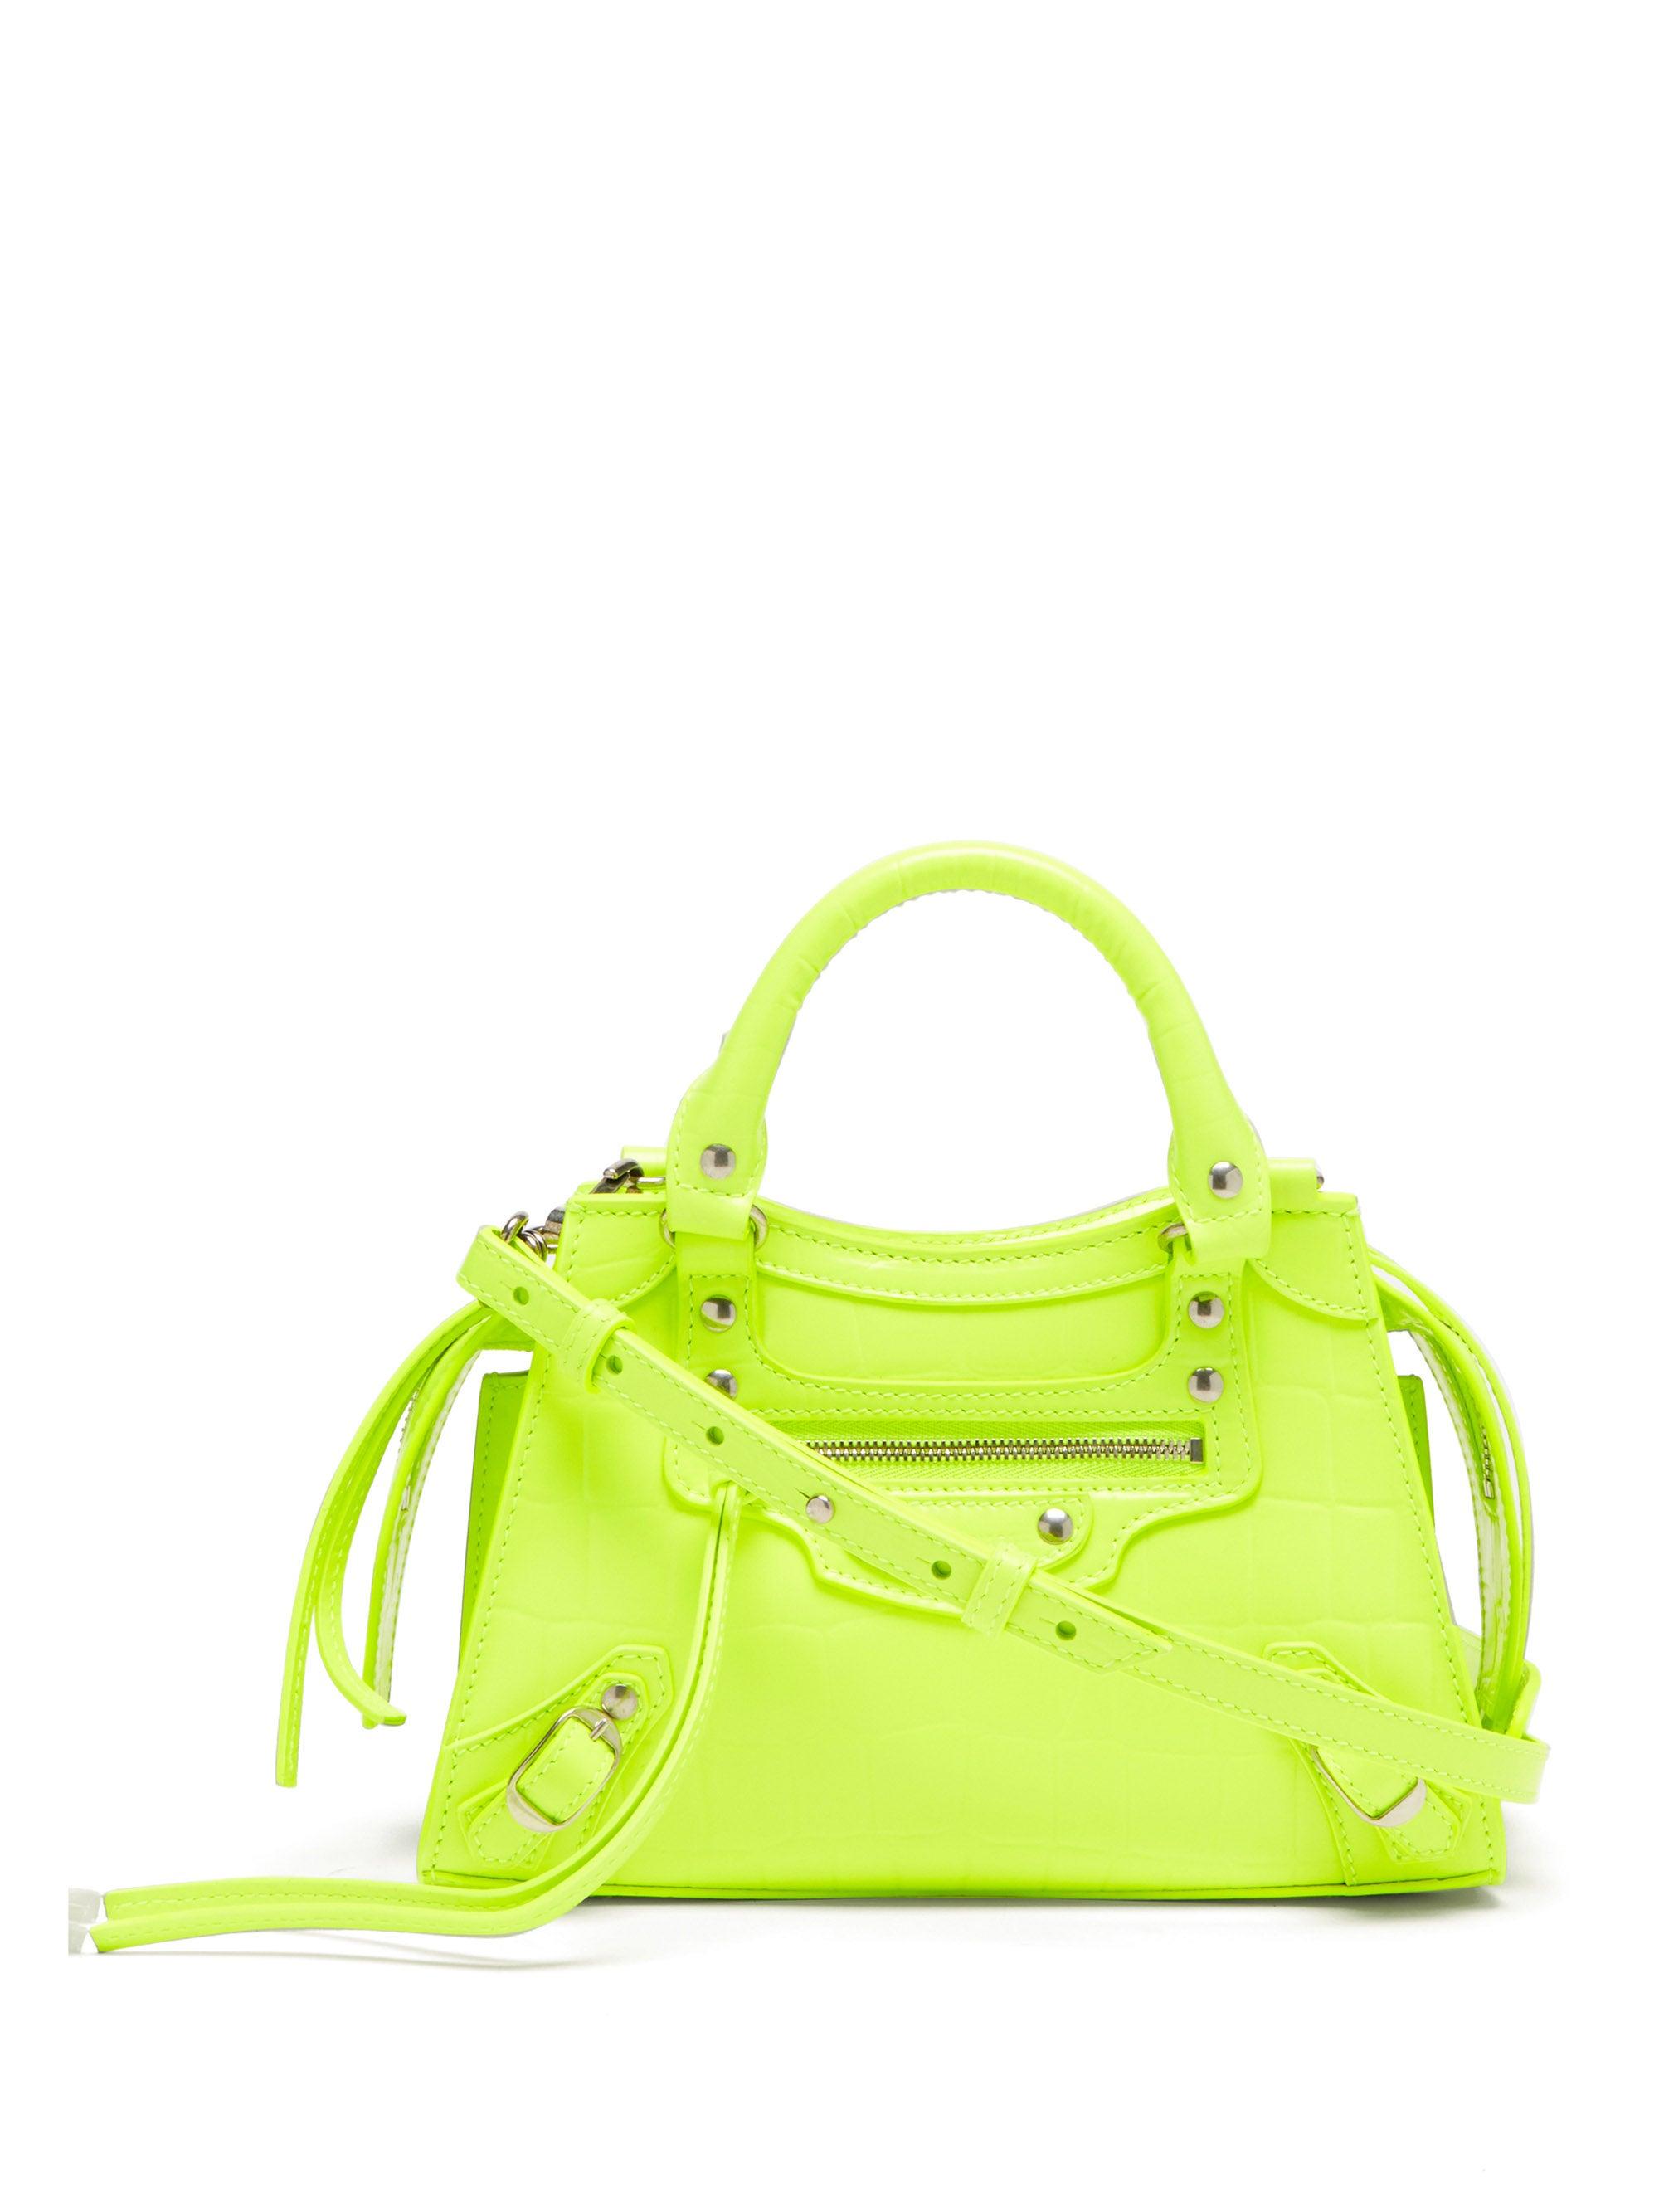 Balenciaga City Bag Small Crinkled Leather Bright Yellow